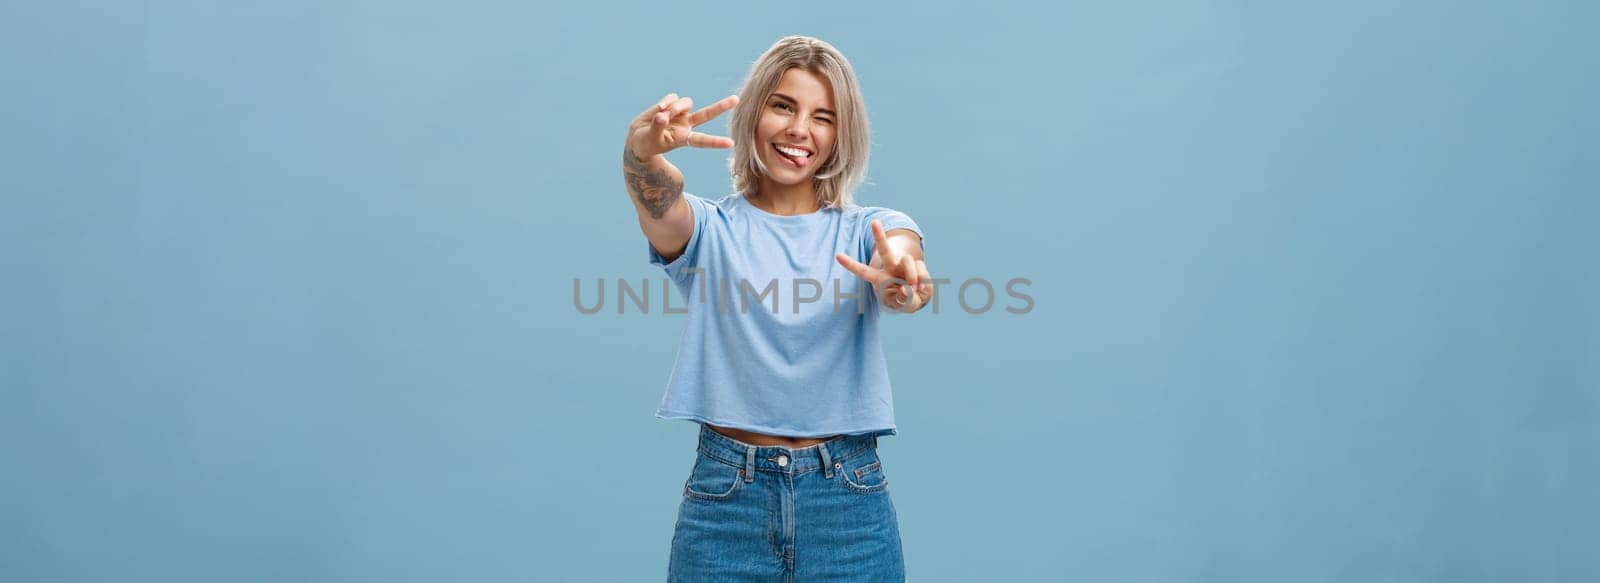 Beautiful tattooed girl enjoying weekends sticking out tongue joyfully winking at camera and smiling showing peace or victory gesture with pulled arms feeling happy posing over blue background. Copy space